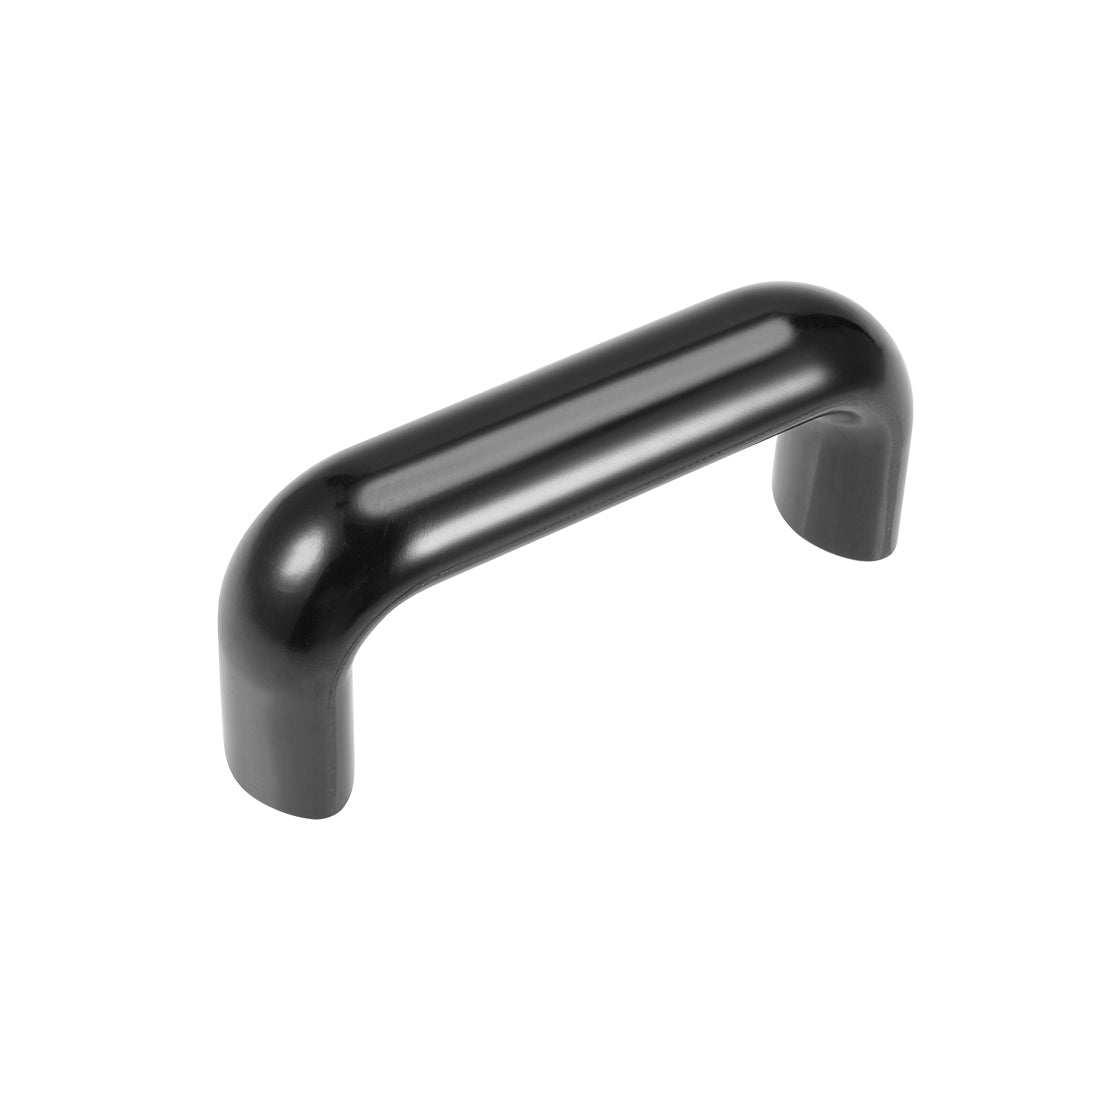 uxcell Uxcell Bakelite Plastic Pull Handle 90mm Hole Centers Black for Industrial Machine, M6 Thread